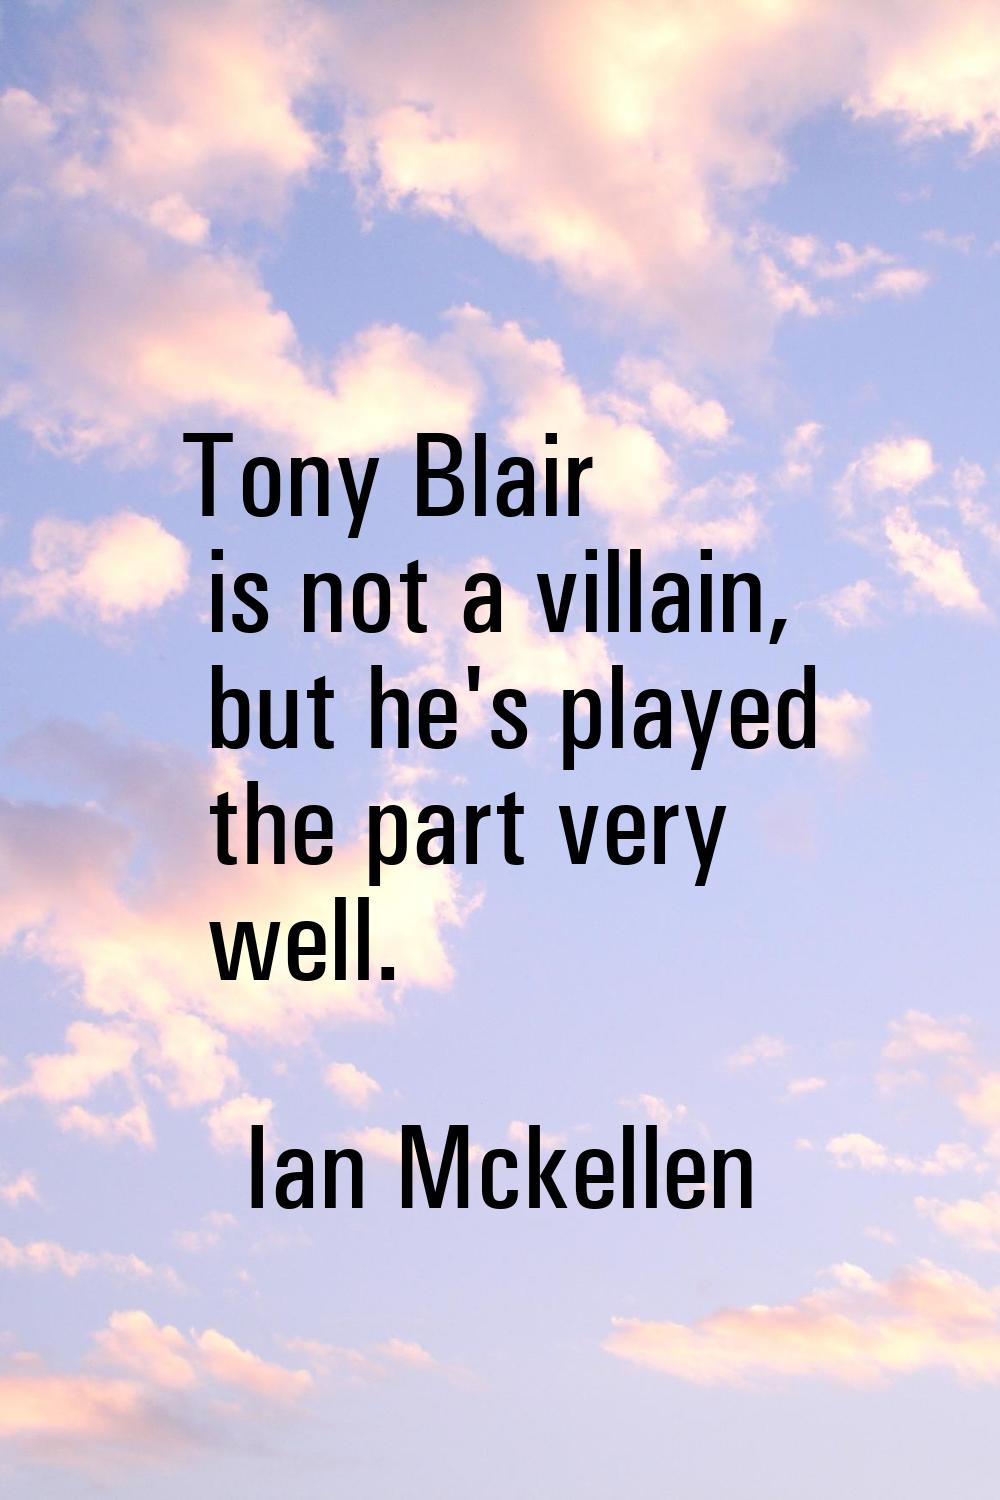 Tony Blair is not a villain, but he's played the part very well.